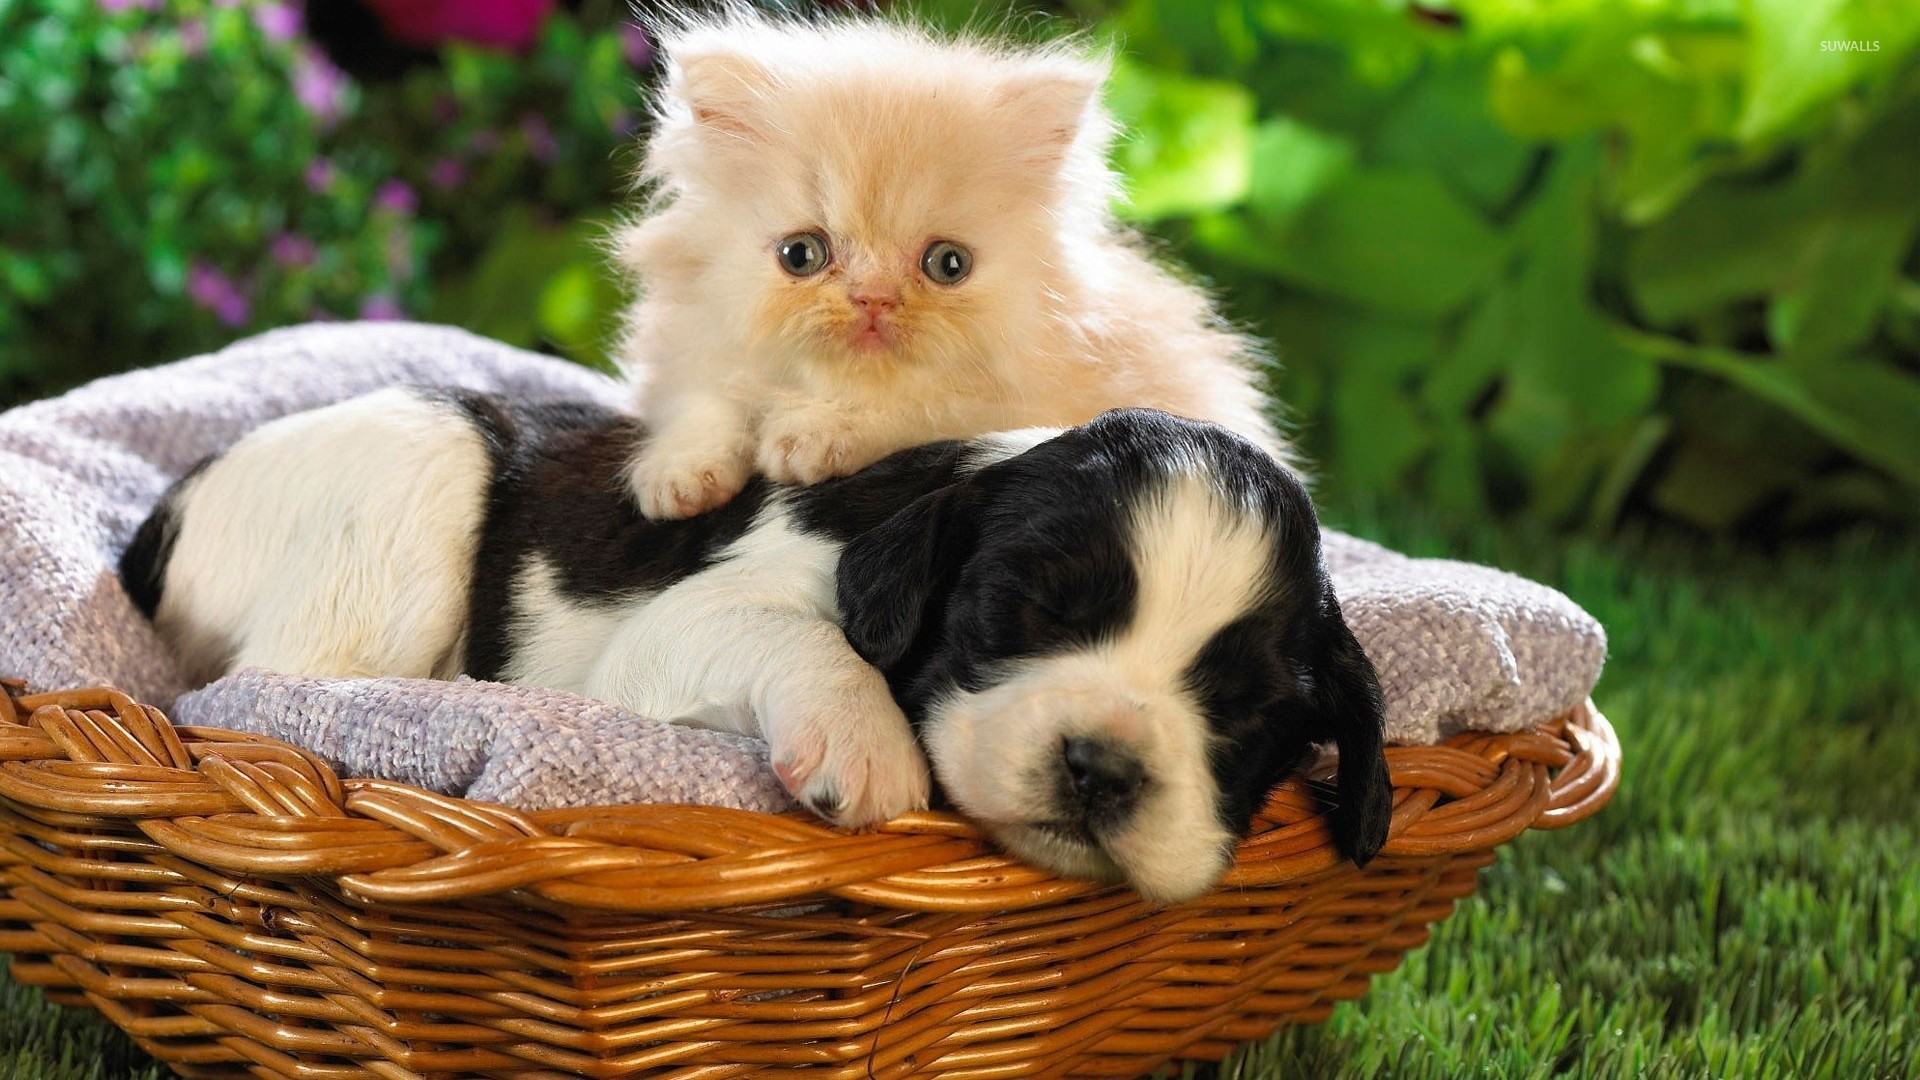 Kitten and puppy wallpaper - Animal wallpapers - #6928